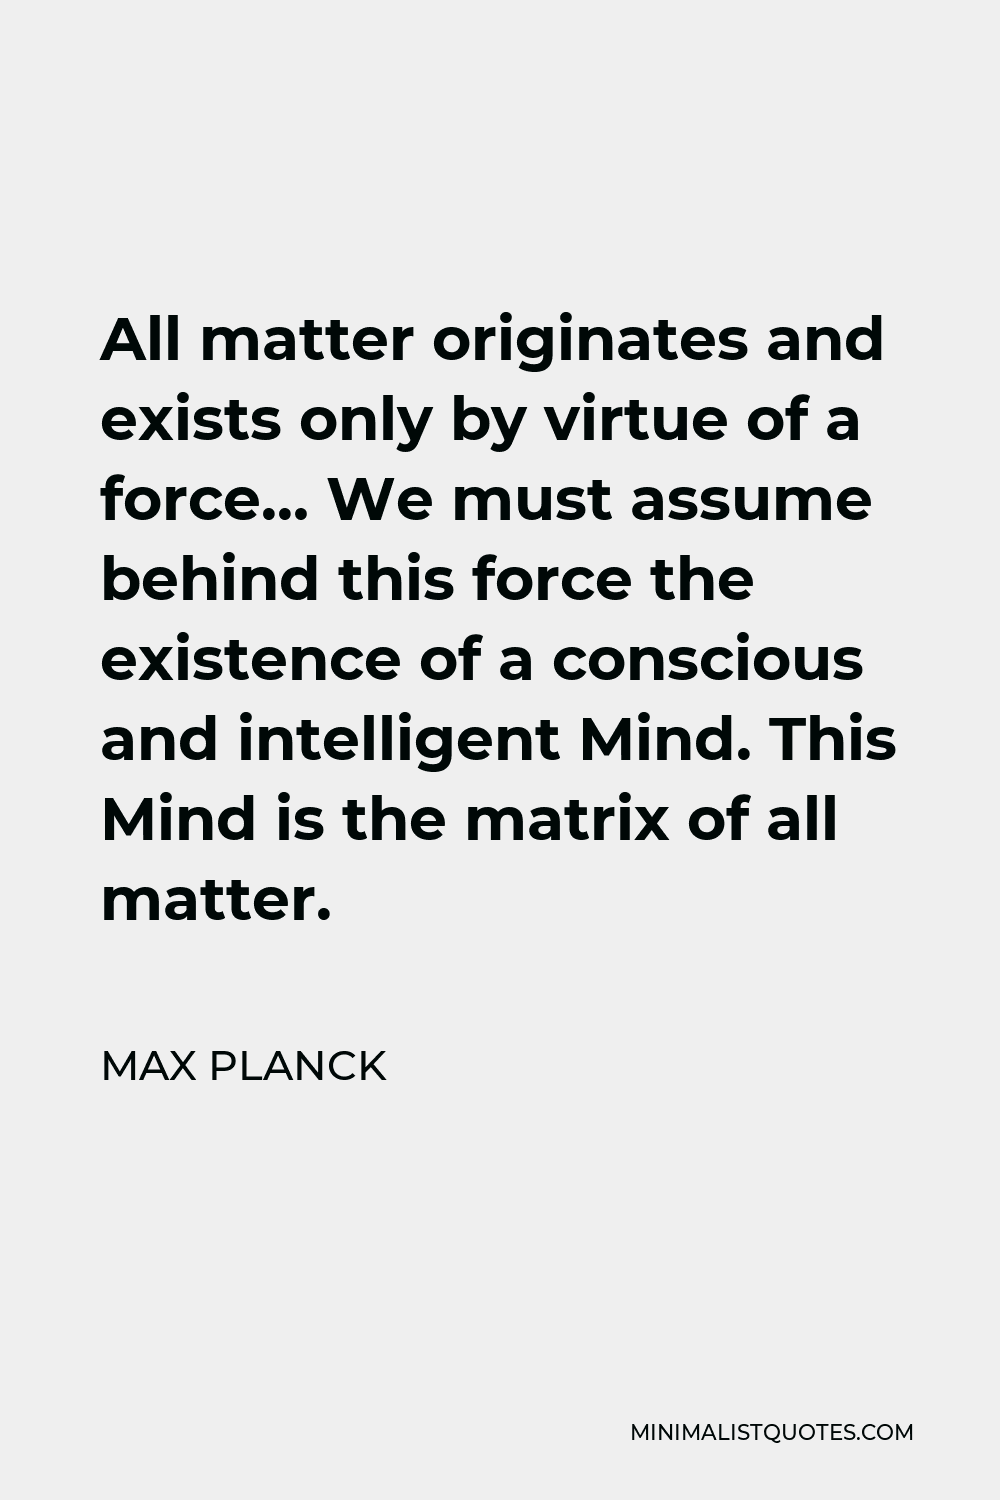 Max Planck Quote - All matter originates and exists only by virtue of a force… We must assume behind this force the existence of a conscious and intelligent Mind. This Mind is the matrix of all matter.